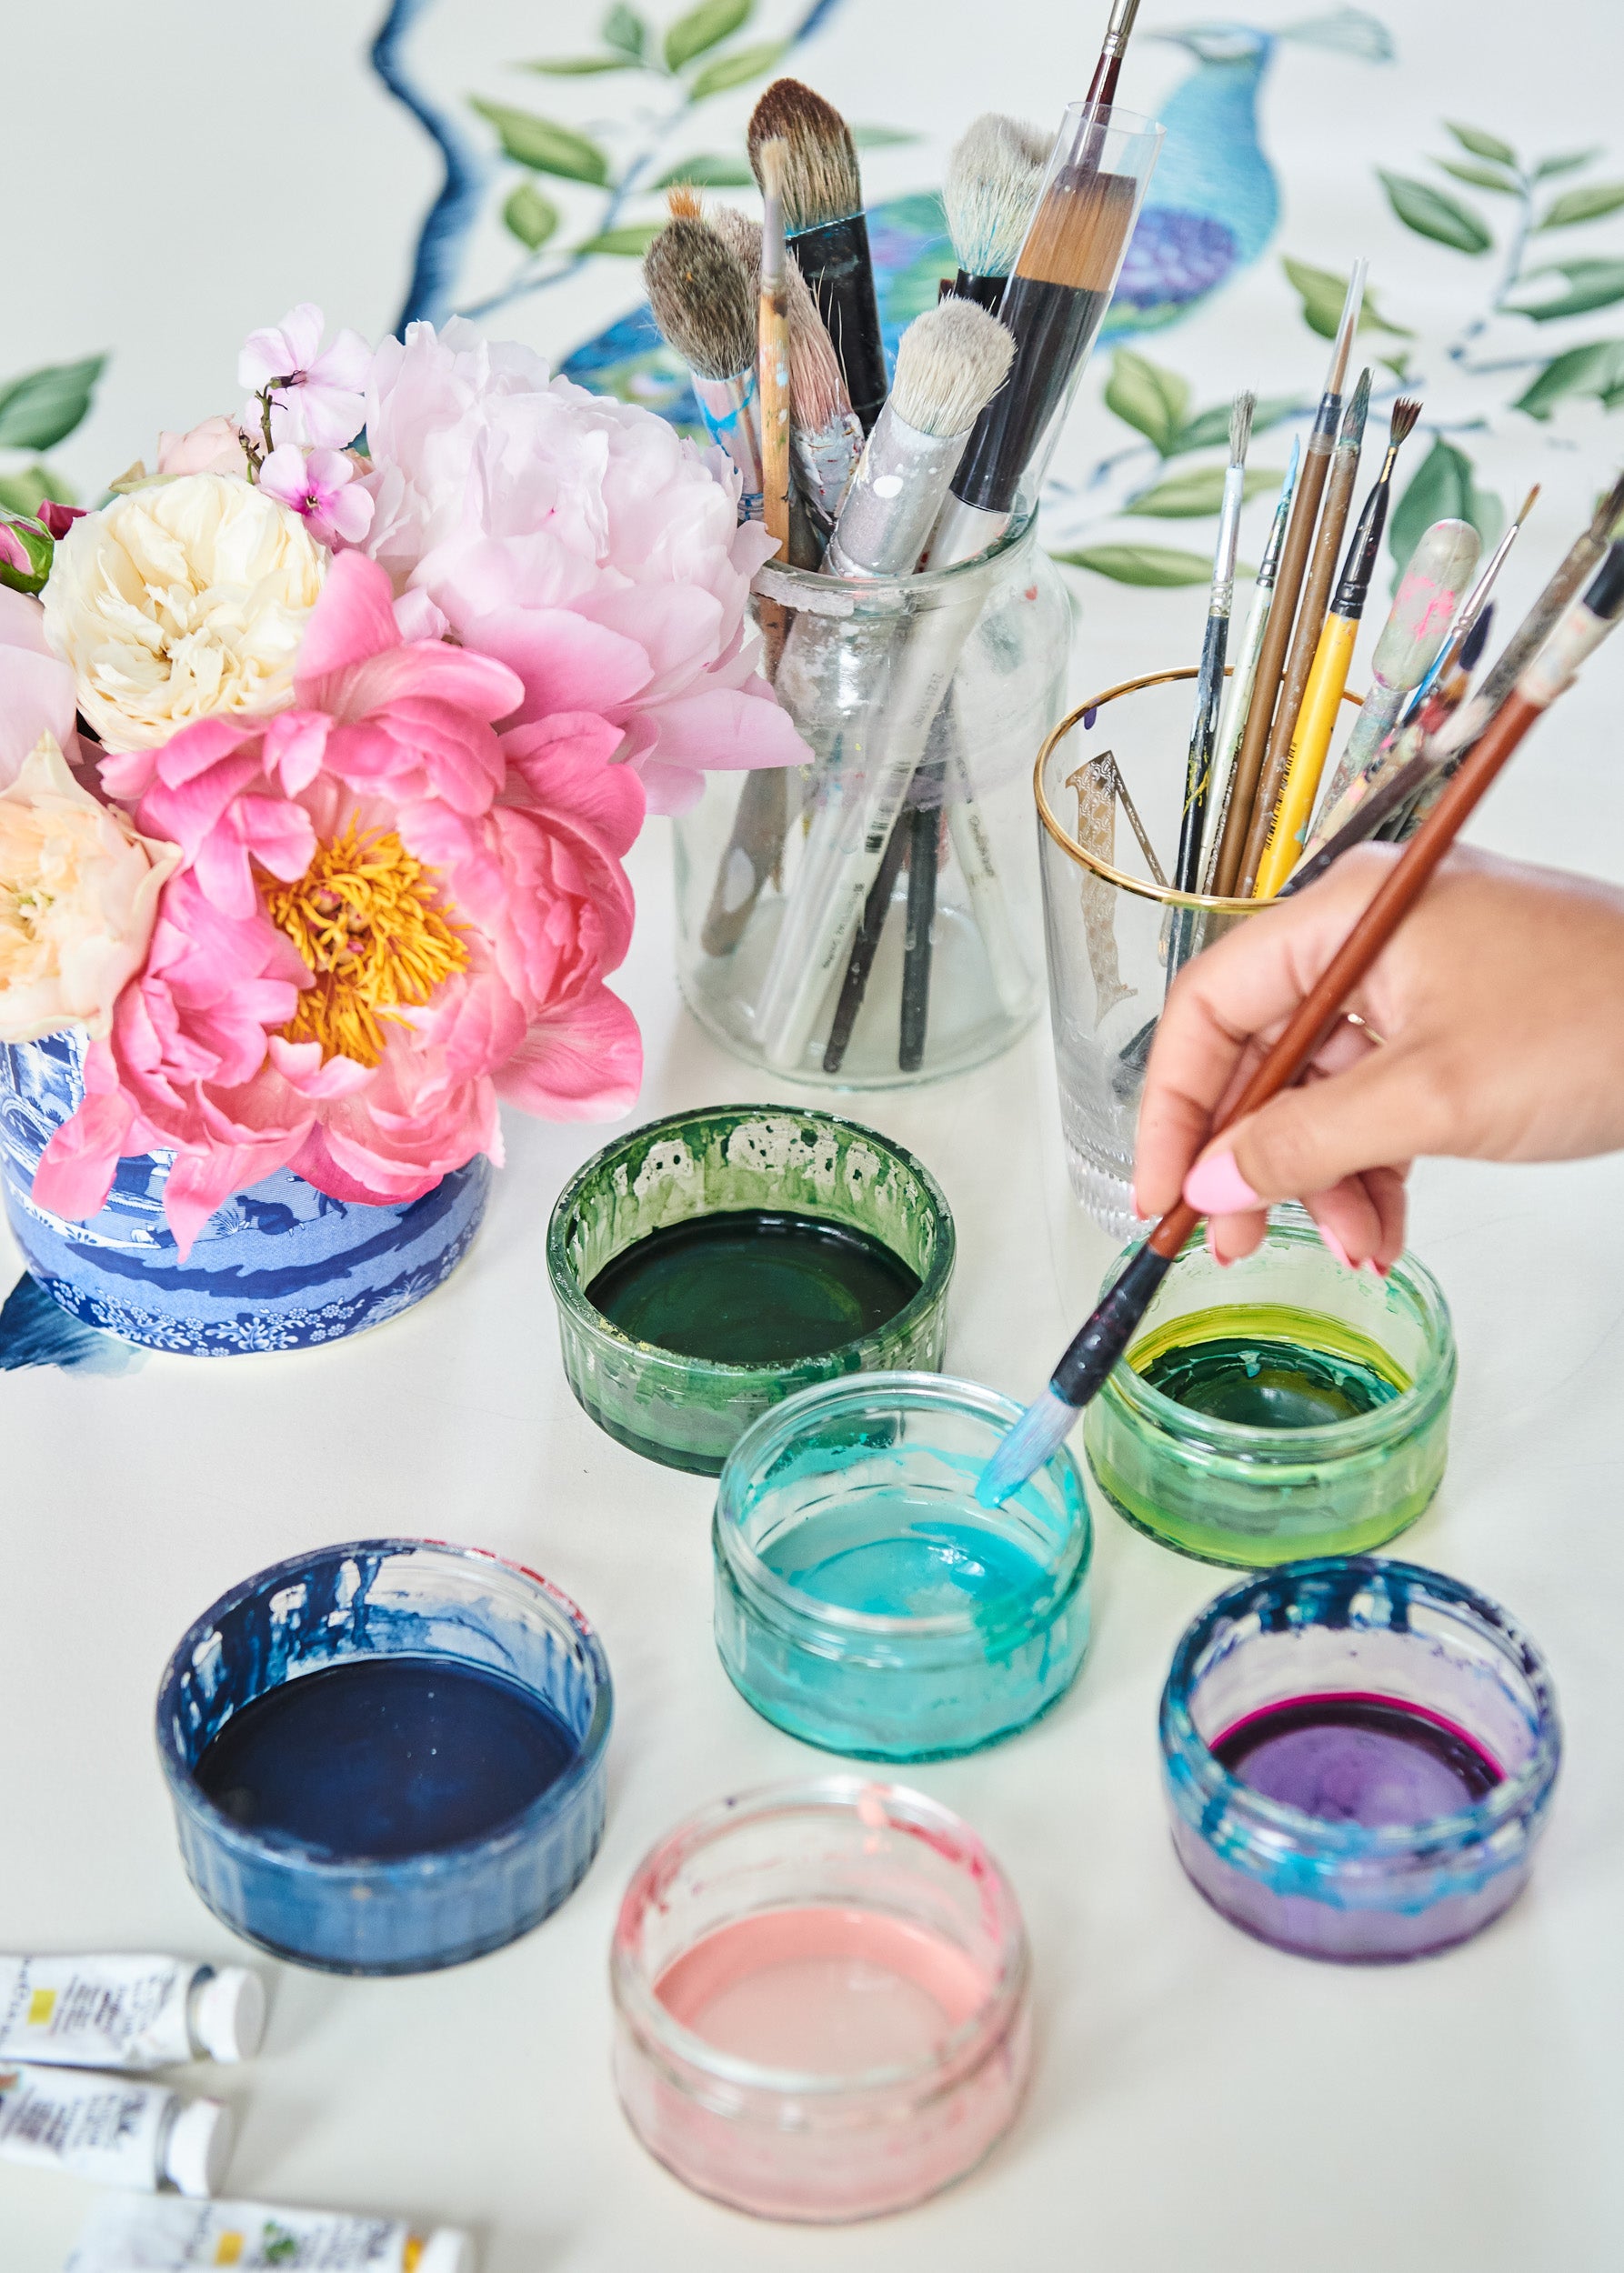 diane hill dipping her paintbrush into a pot of watercolour paint surround by other pots of paint next to a vase of flowers